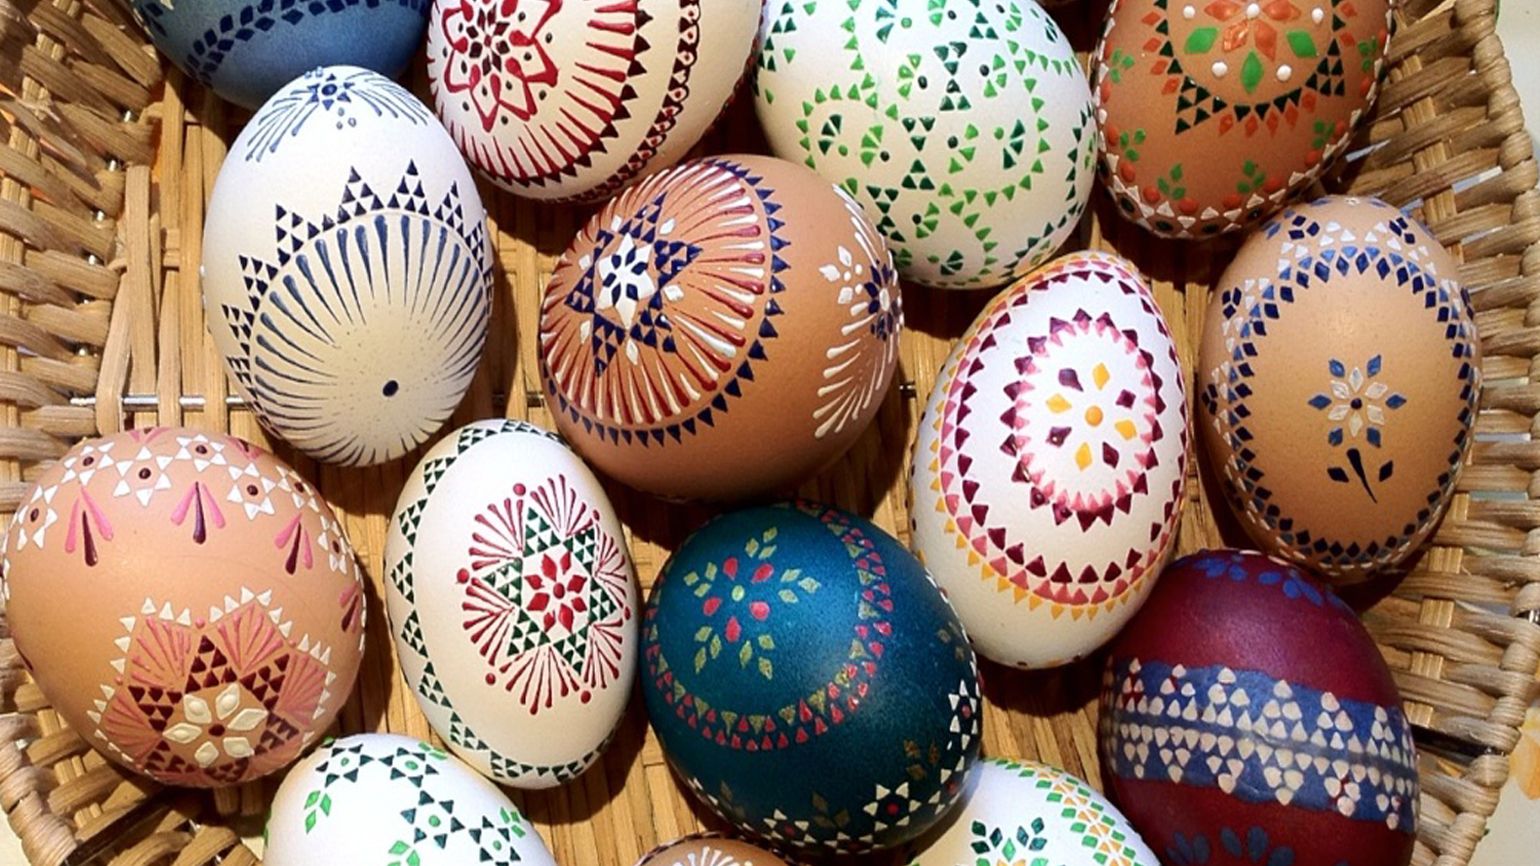 A basket full of Easter eggs with dot and line designs from Germany